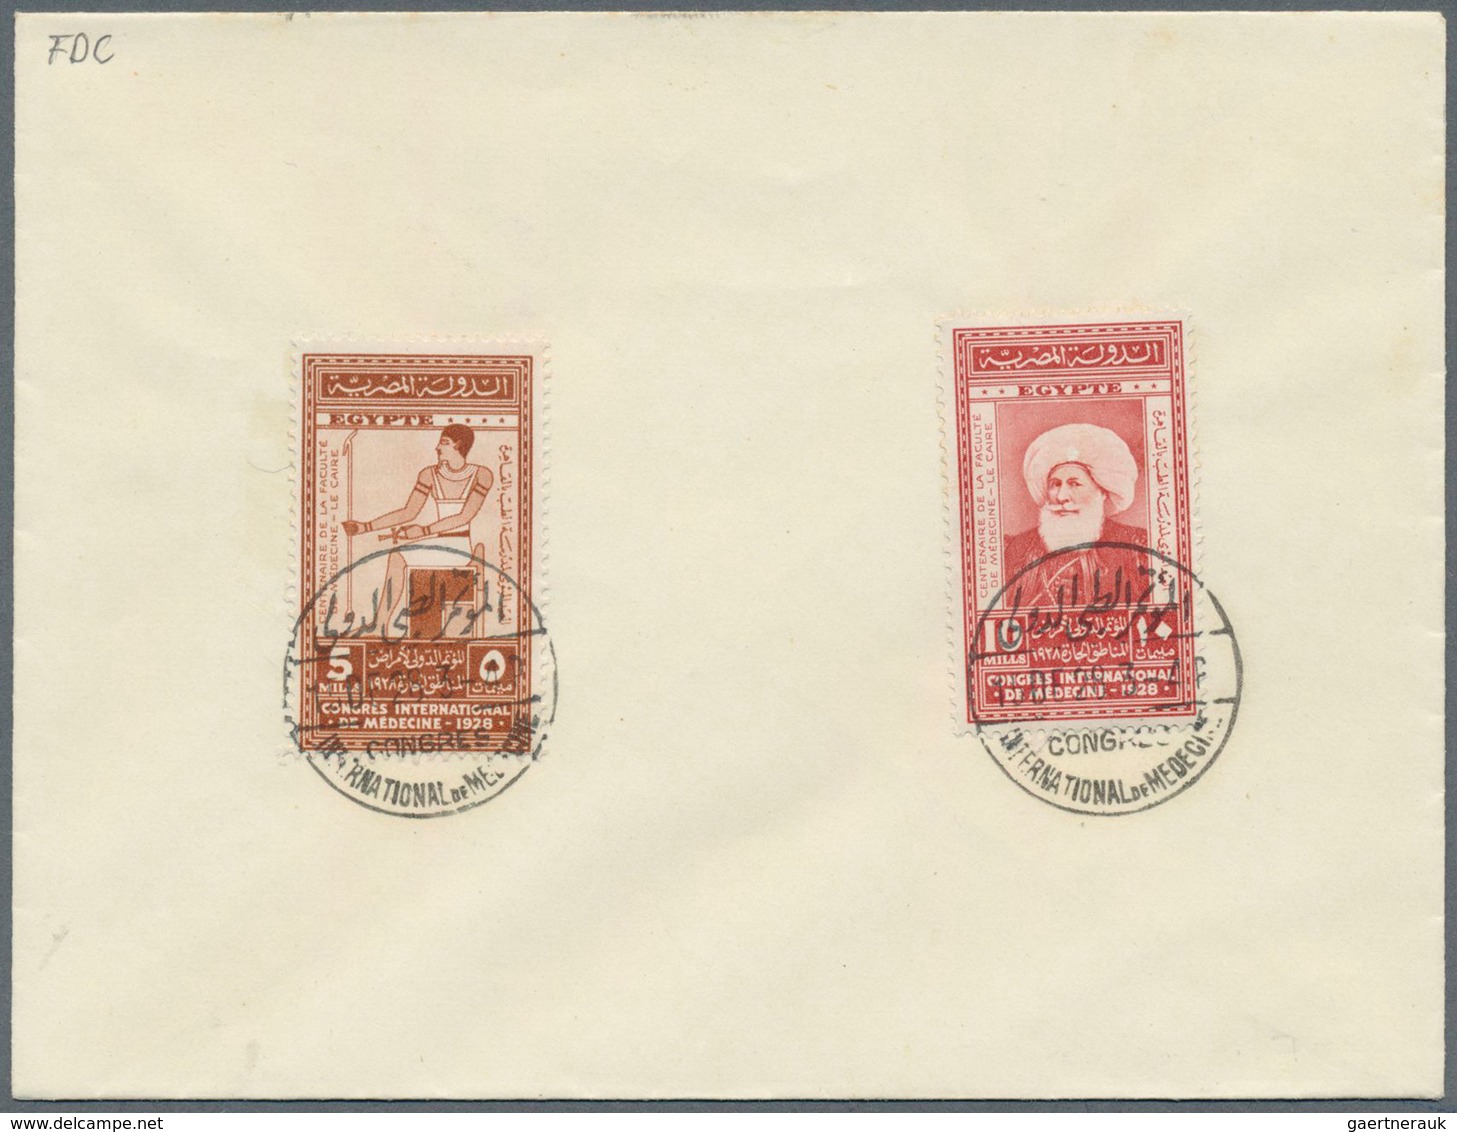 22108 Ägypten: 1889/2007, accumulation of apprx. 280 covers/cards with commercial and philatelic mail, a n